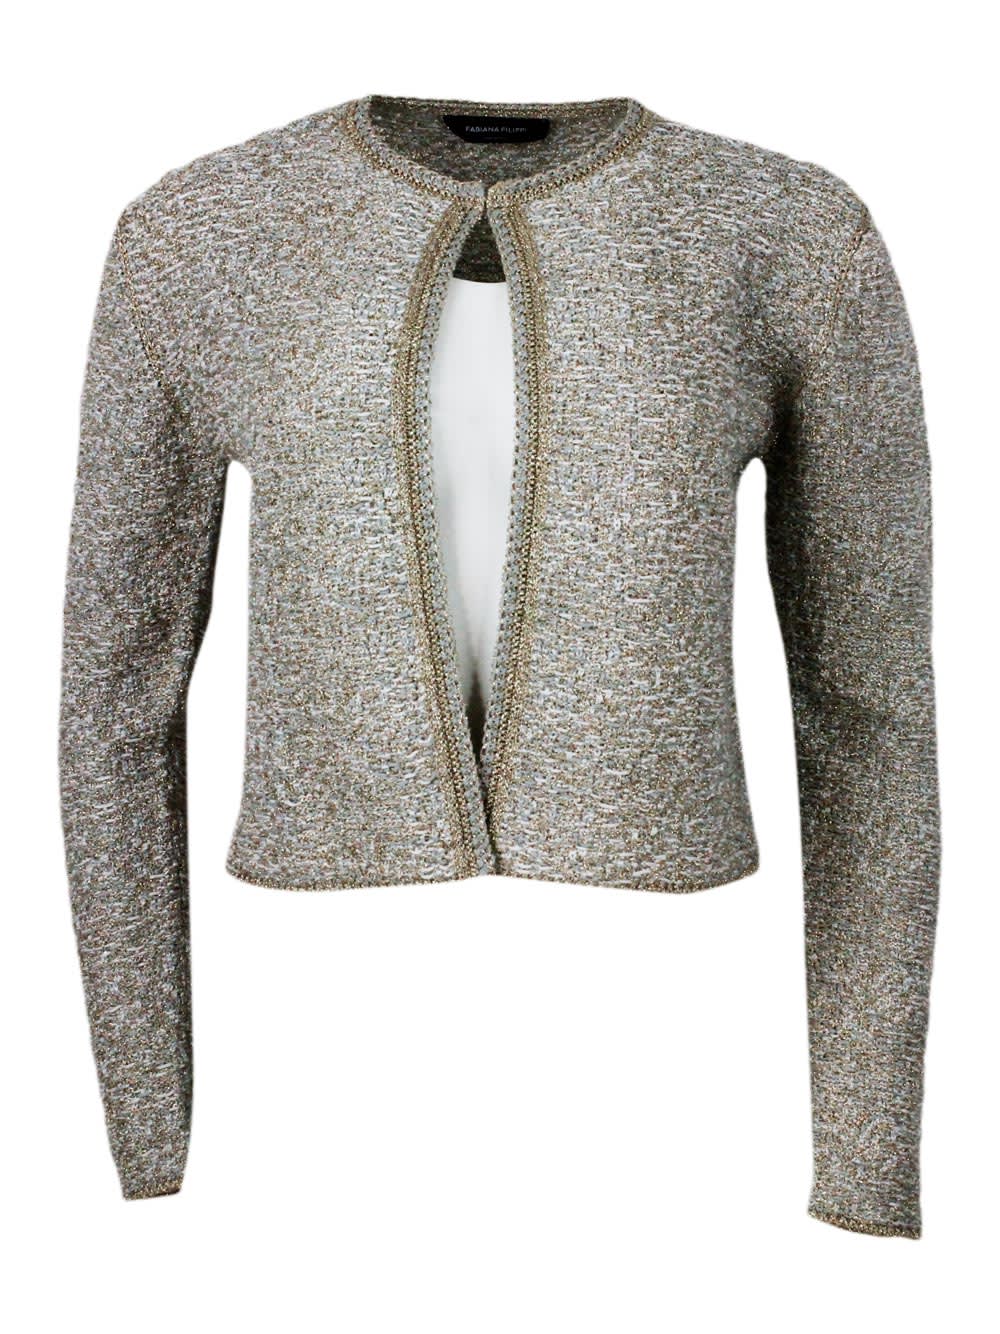 Chanel-style Jacket Sweater Open On The Front And With Hook Closure Embellished With Bright Lurex Threads